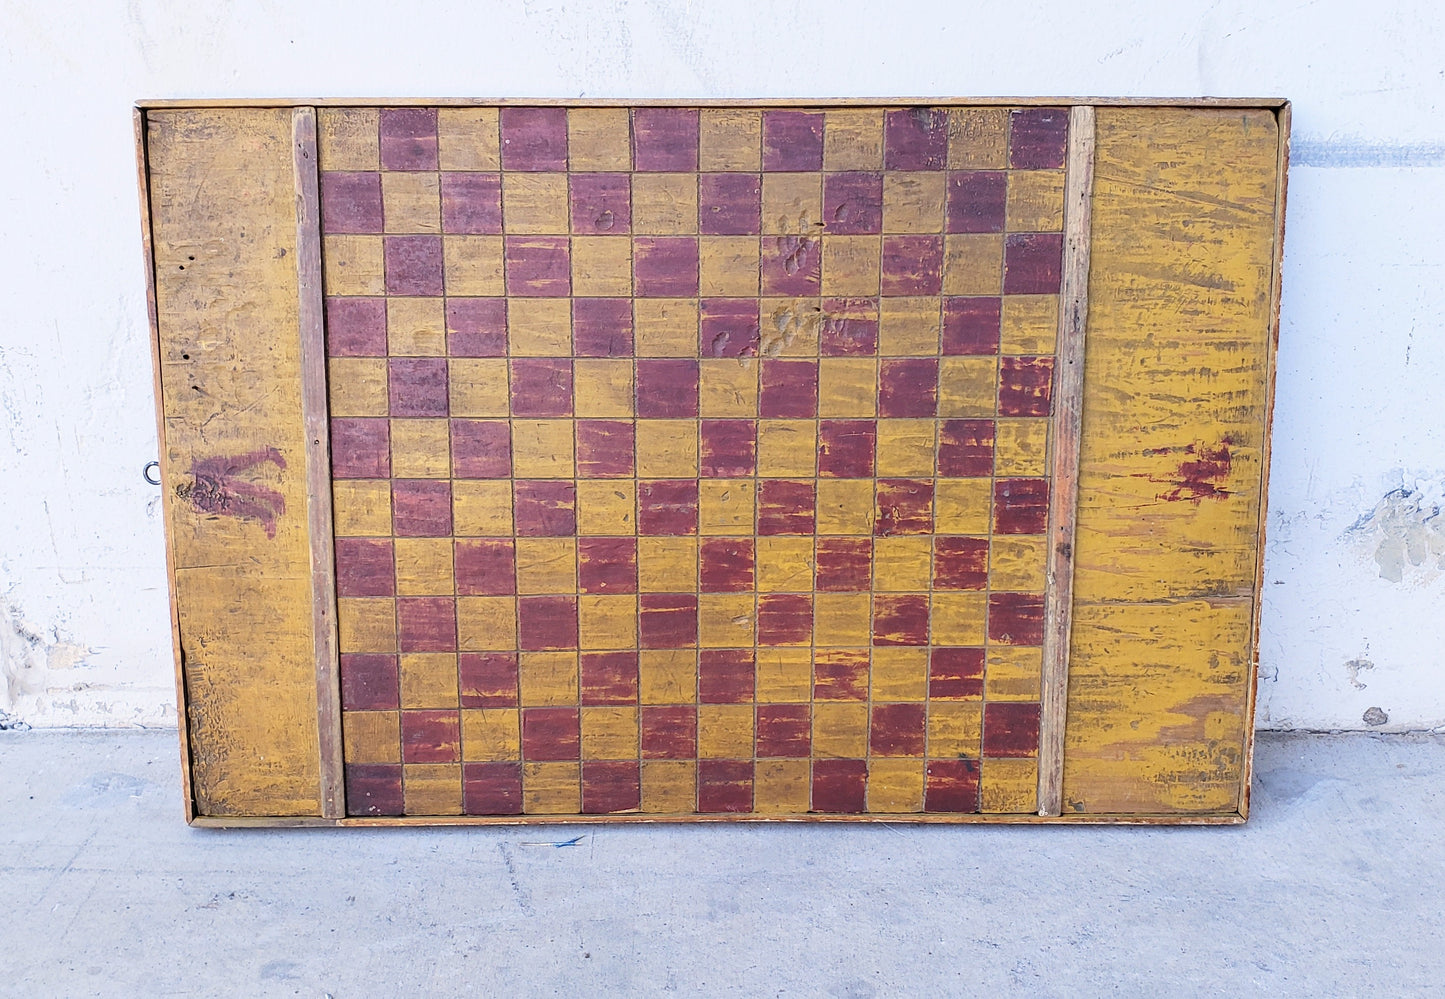 Wooden Game Board